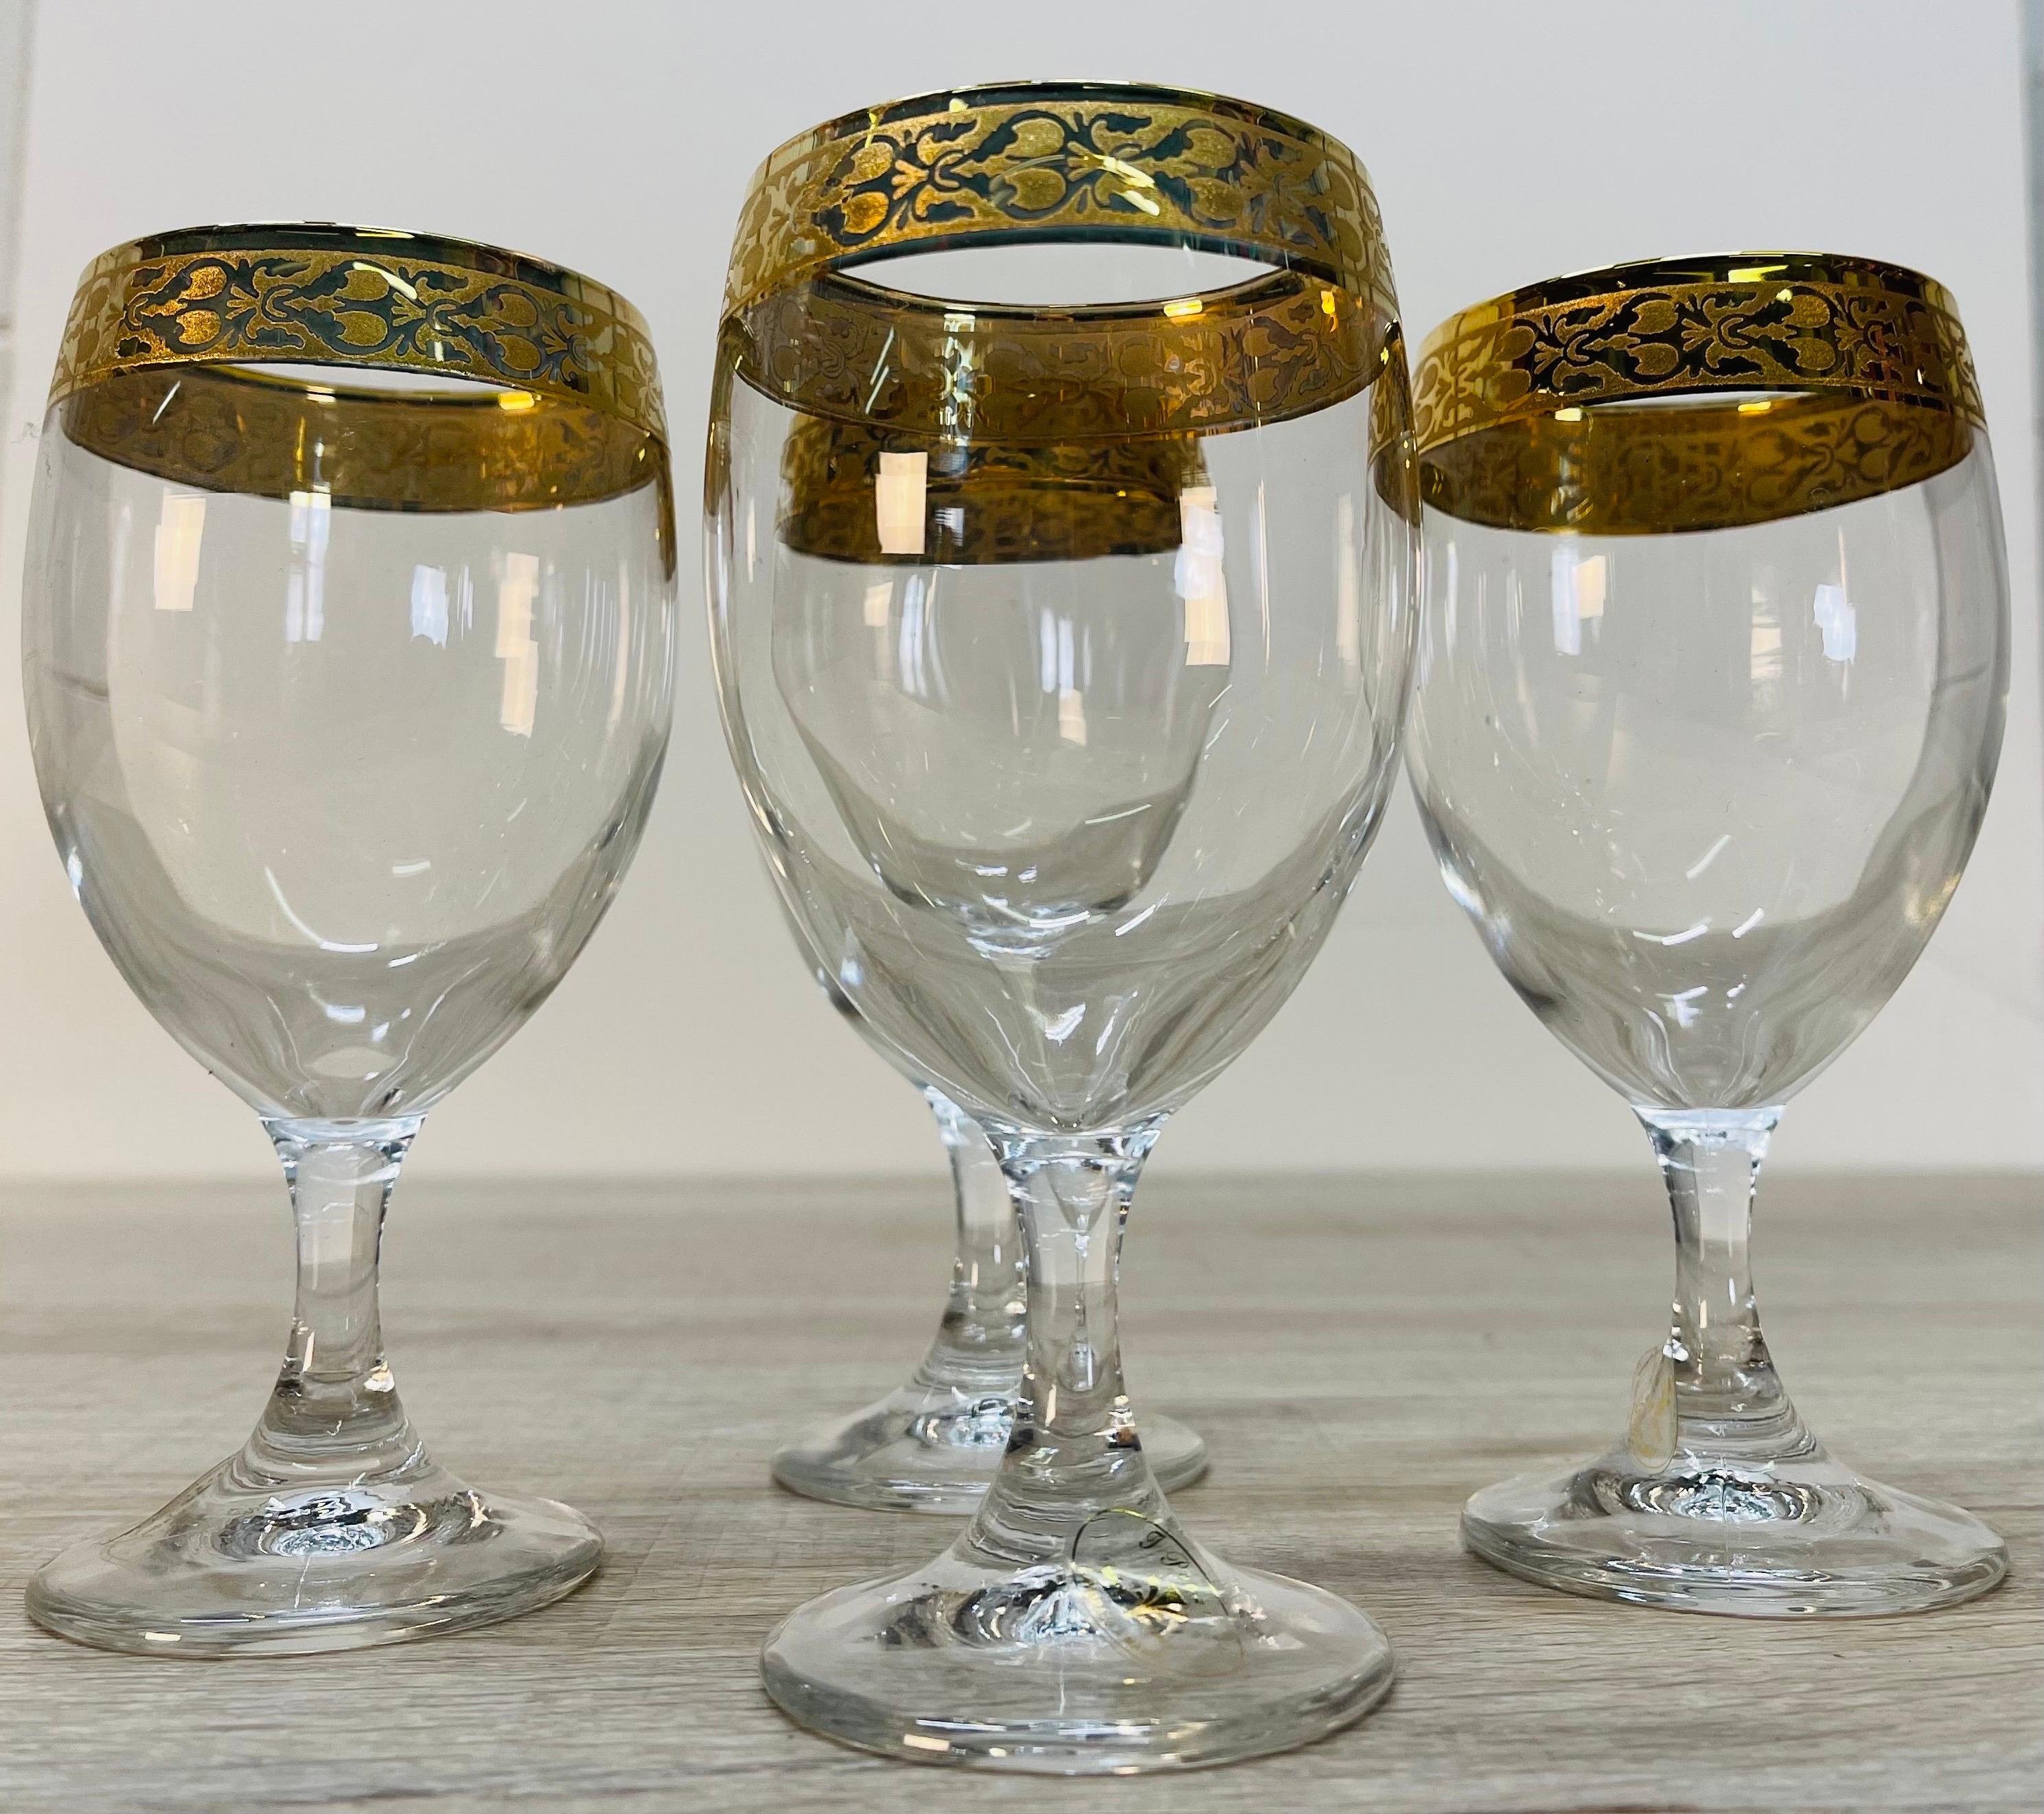 Italian Gold Rim Wine Stems, Set of 4 In Good Condition For Sale In Amherst, NH